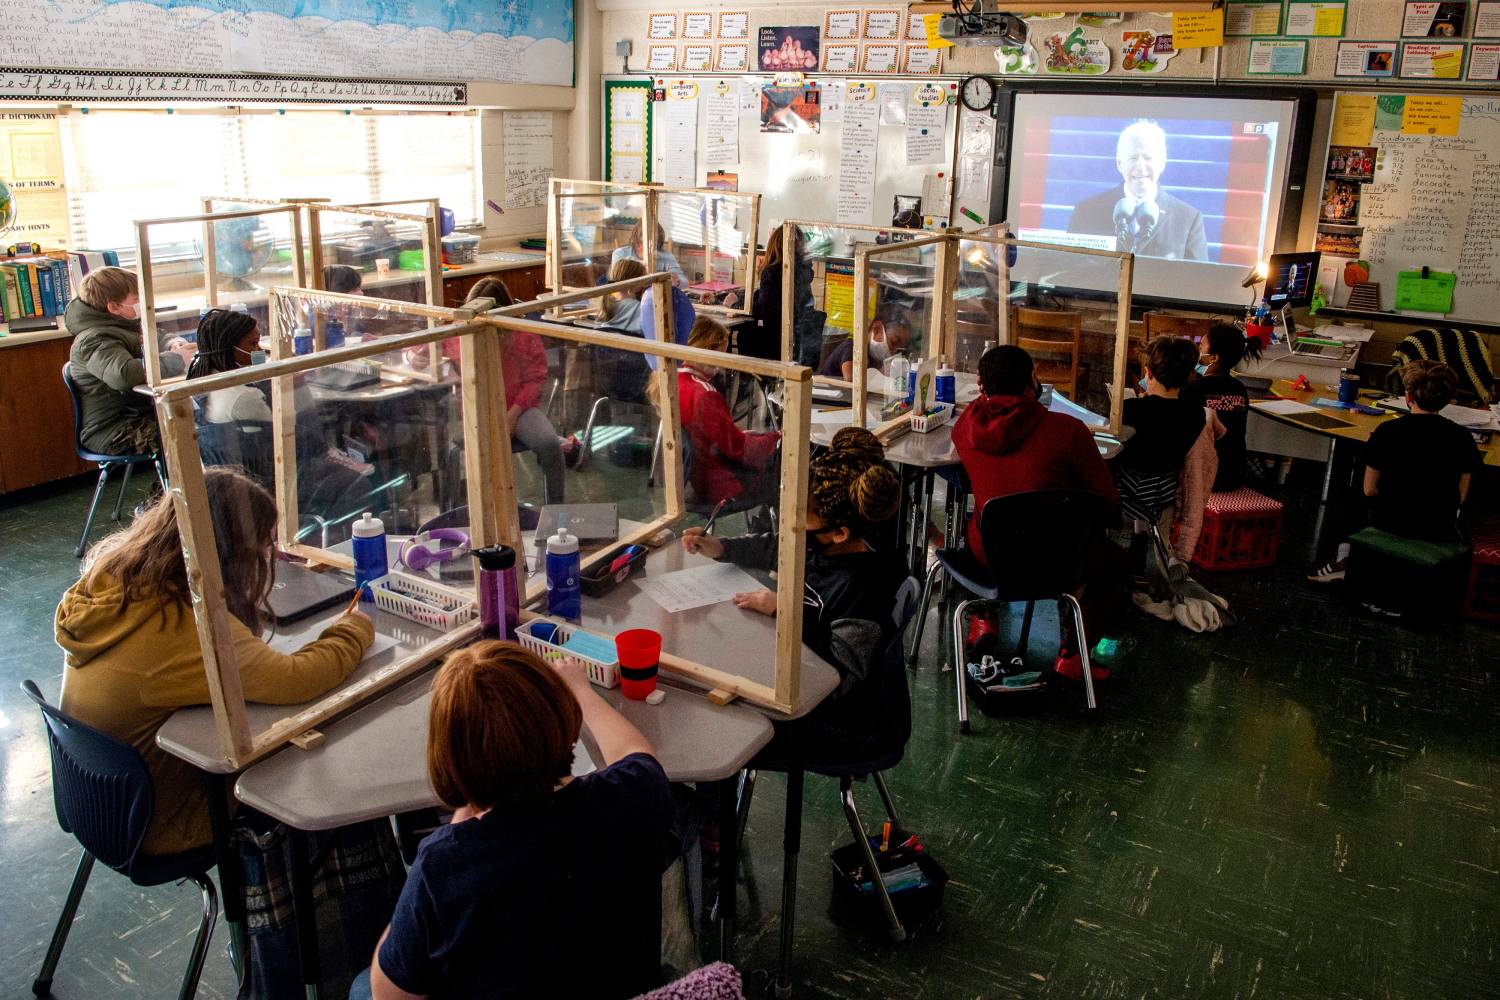 Students in Anne Lefler   s fifth grade class at South Knoxville Elementary watch as President Joe Biden speaks to the nation in his inauguration speech on Wednesday, January 20, 2021.Kns Inauguration School Bp